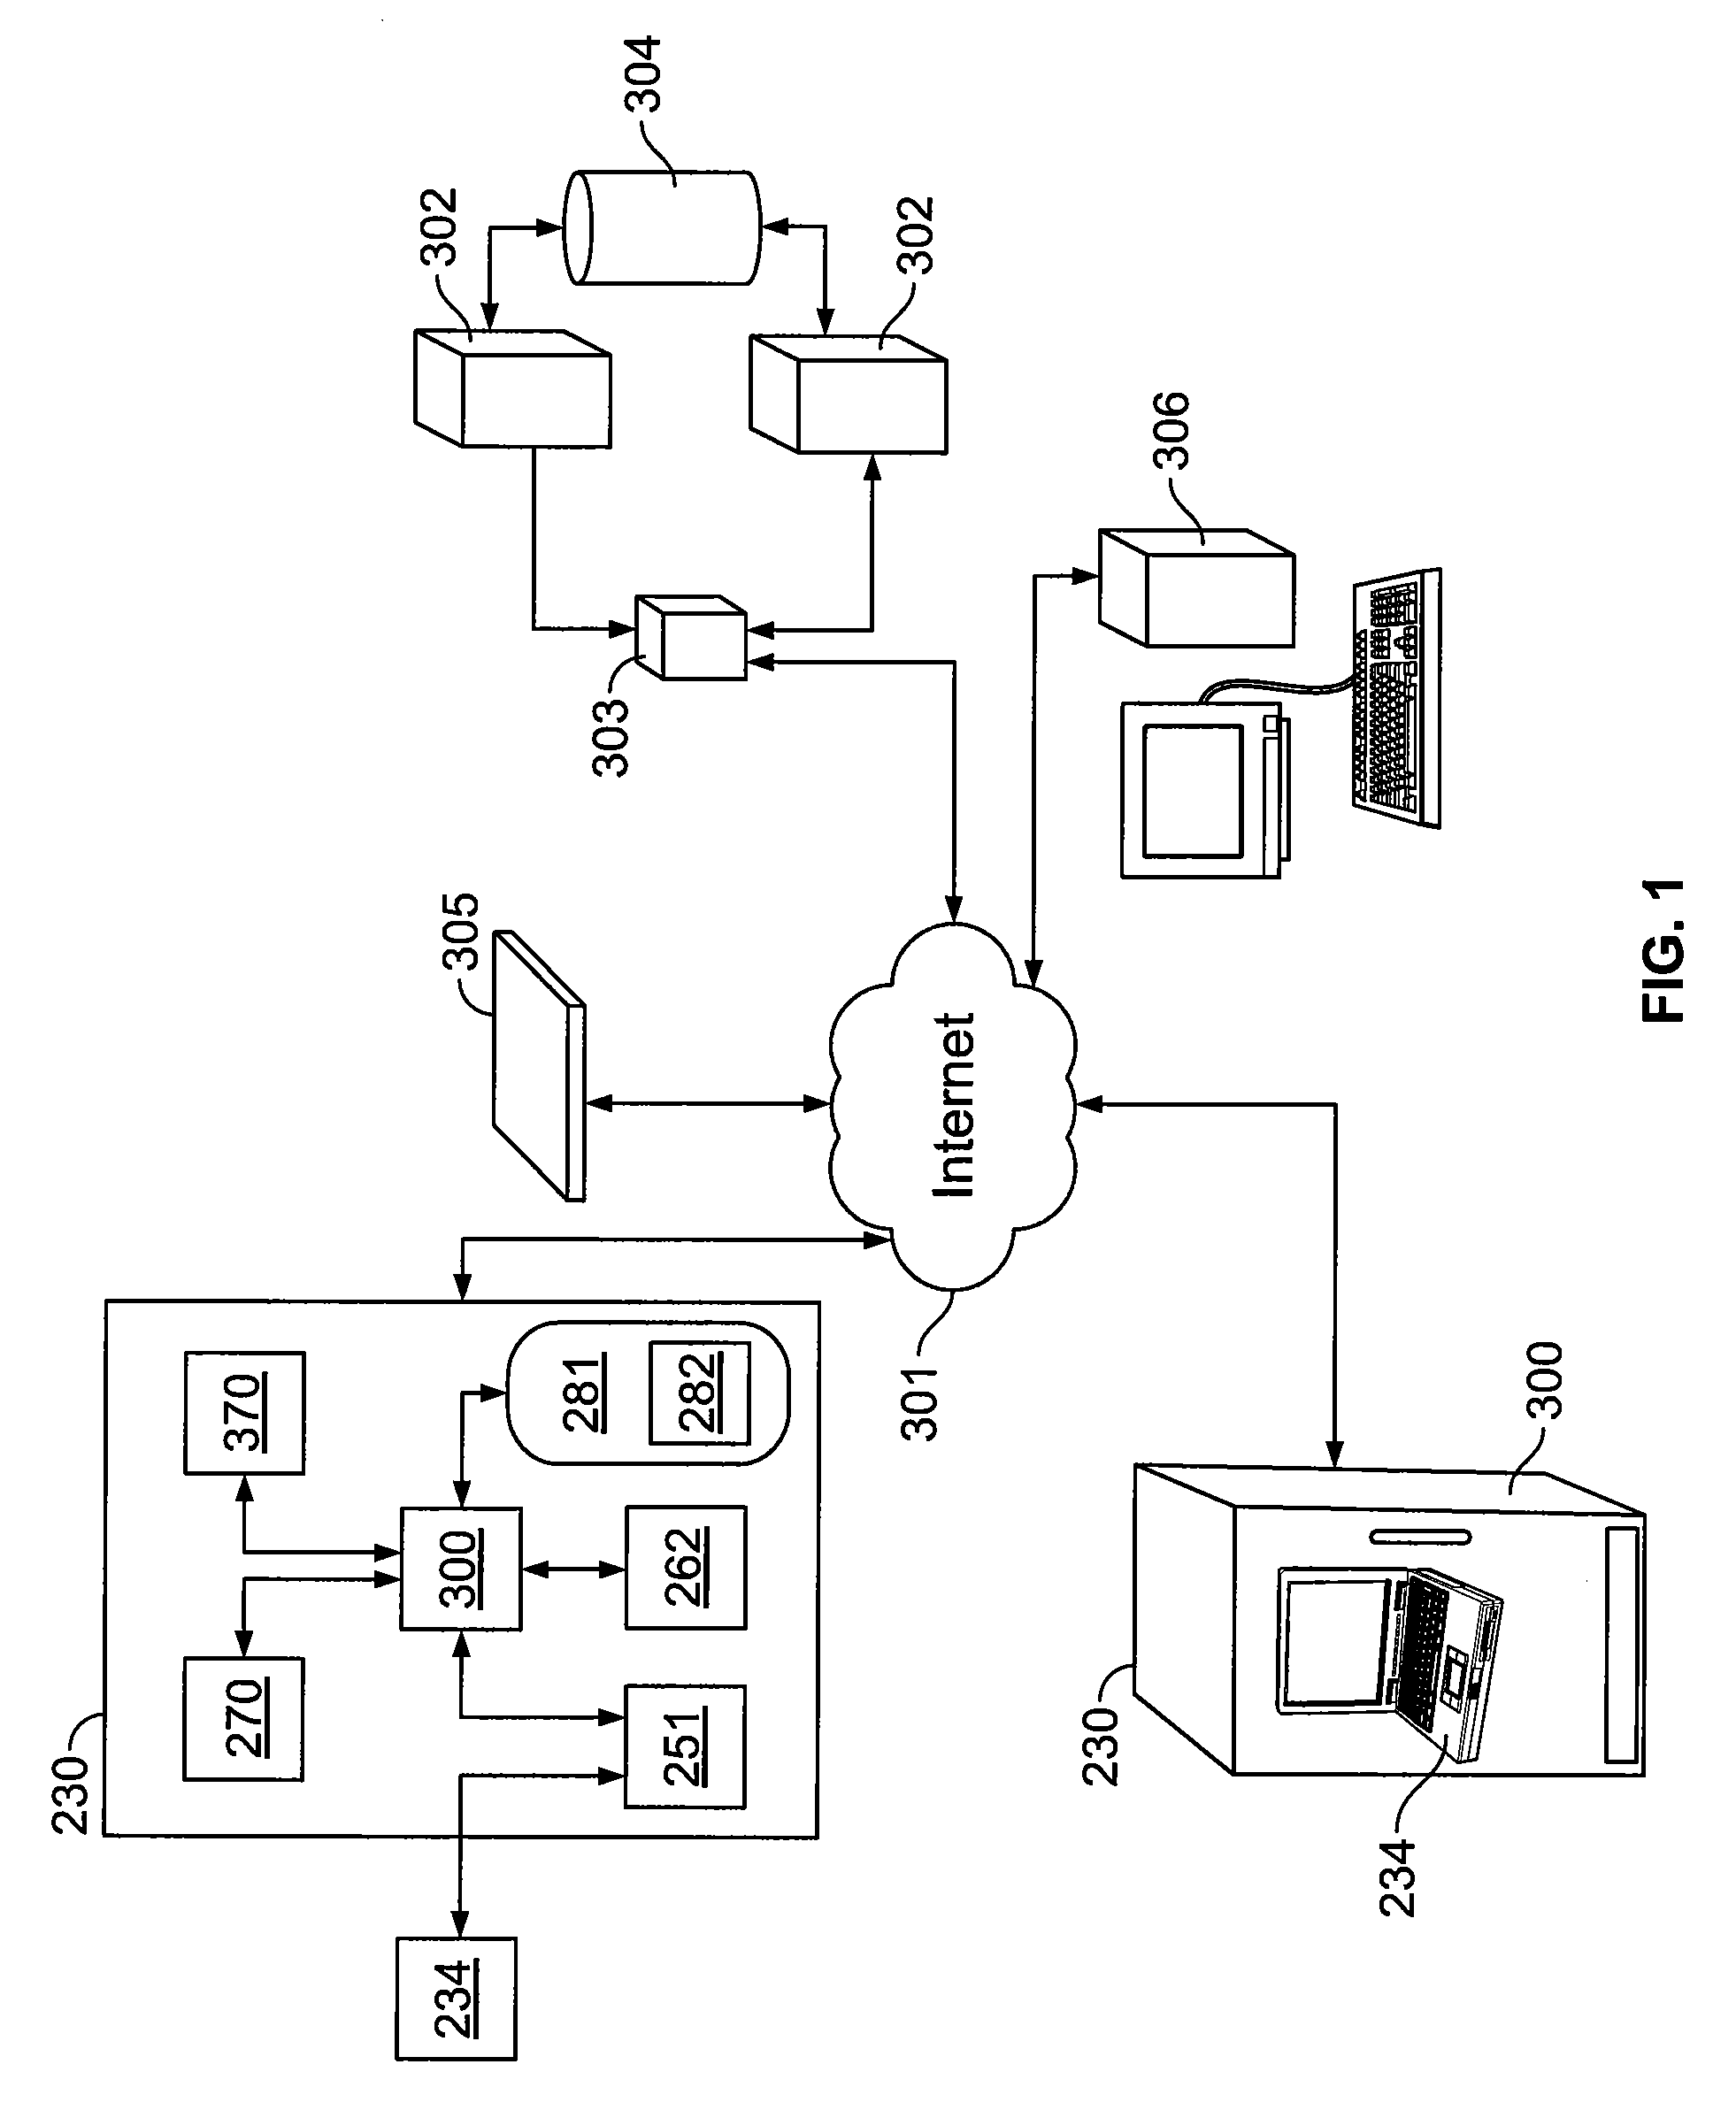 Article Vending Machine And Method for Auditing Inventory While Article Vending Machine Remains Operational